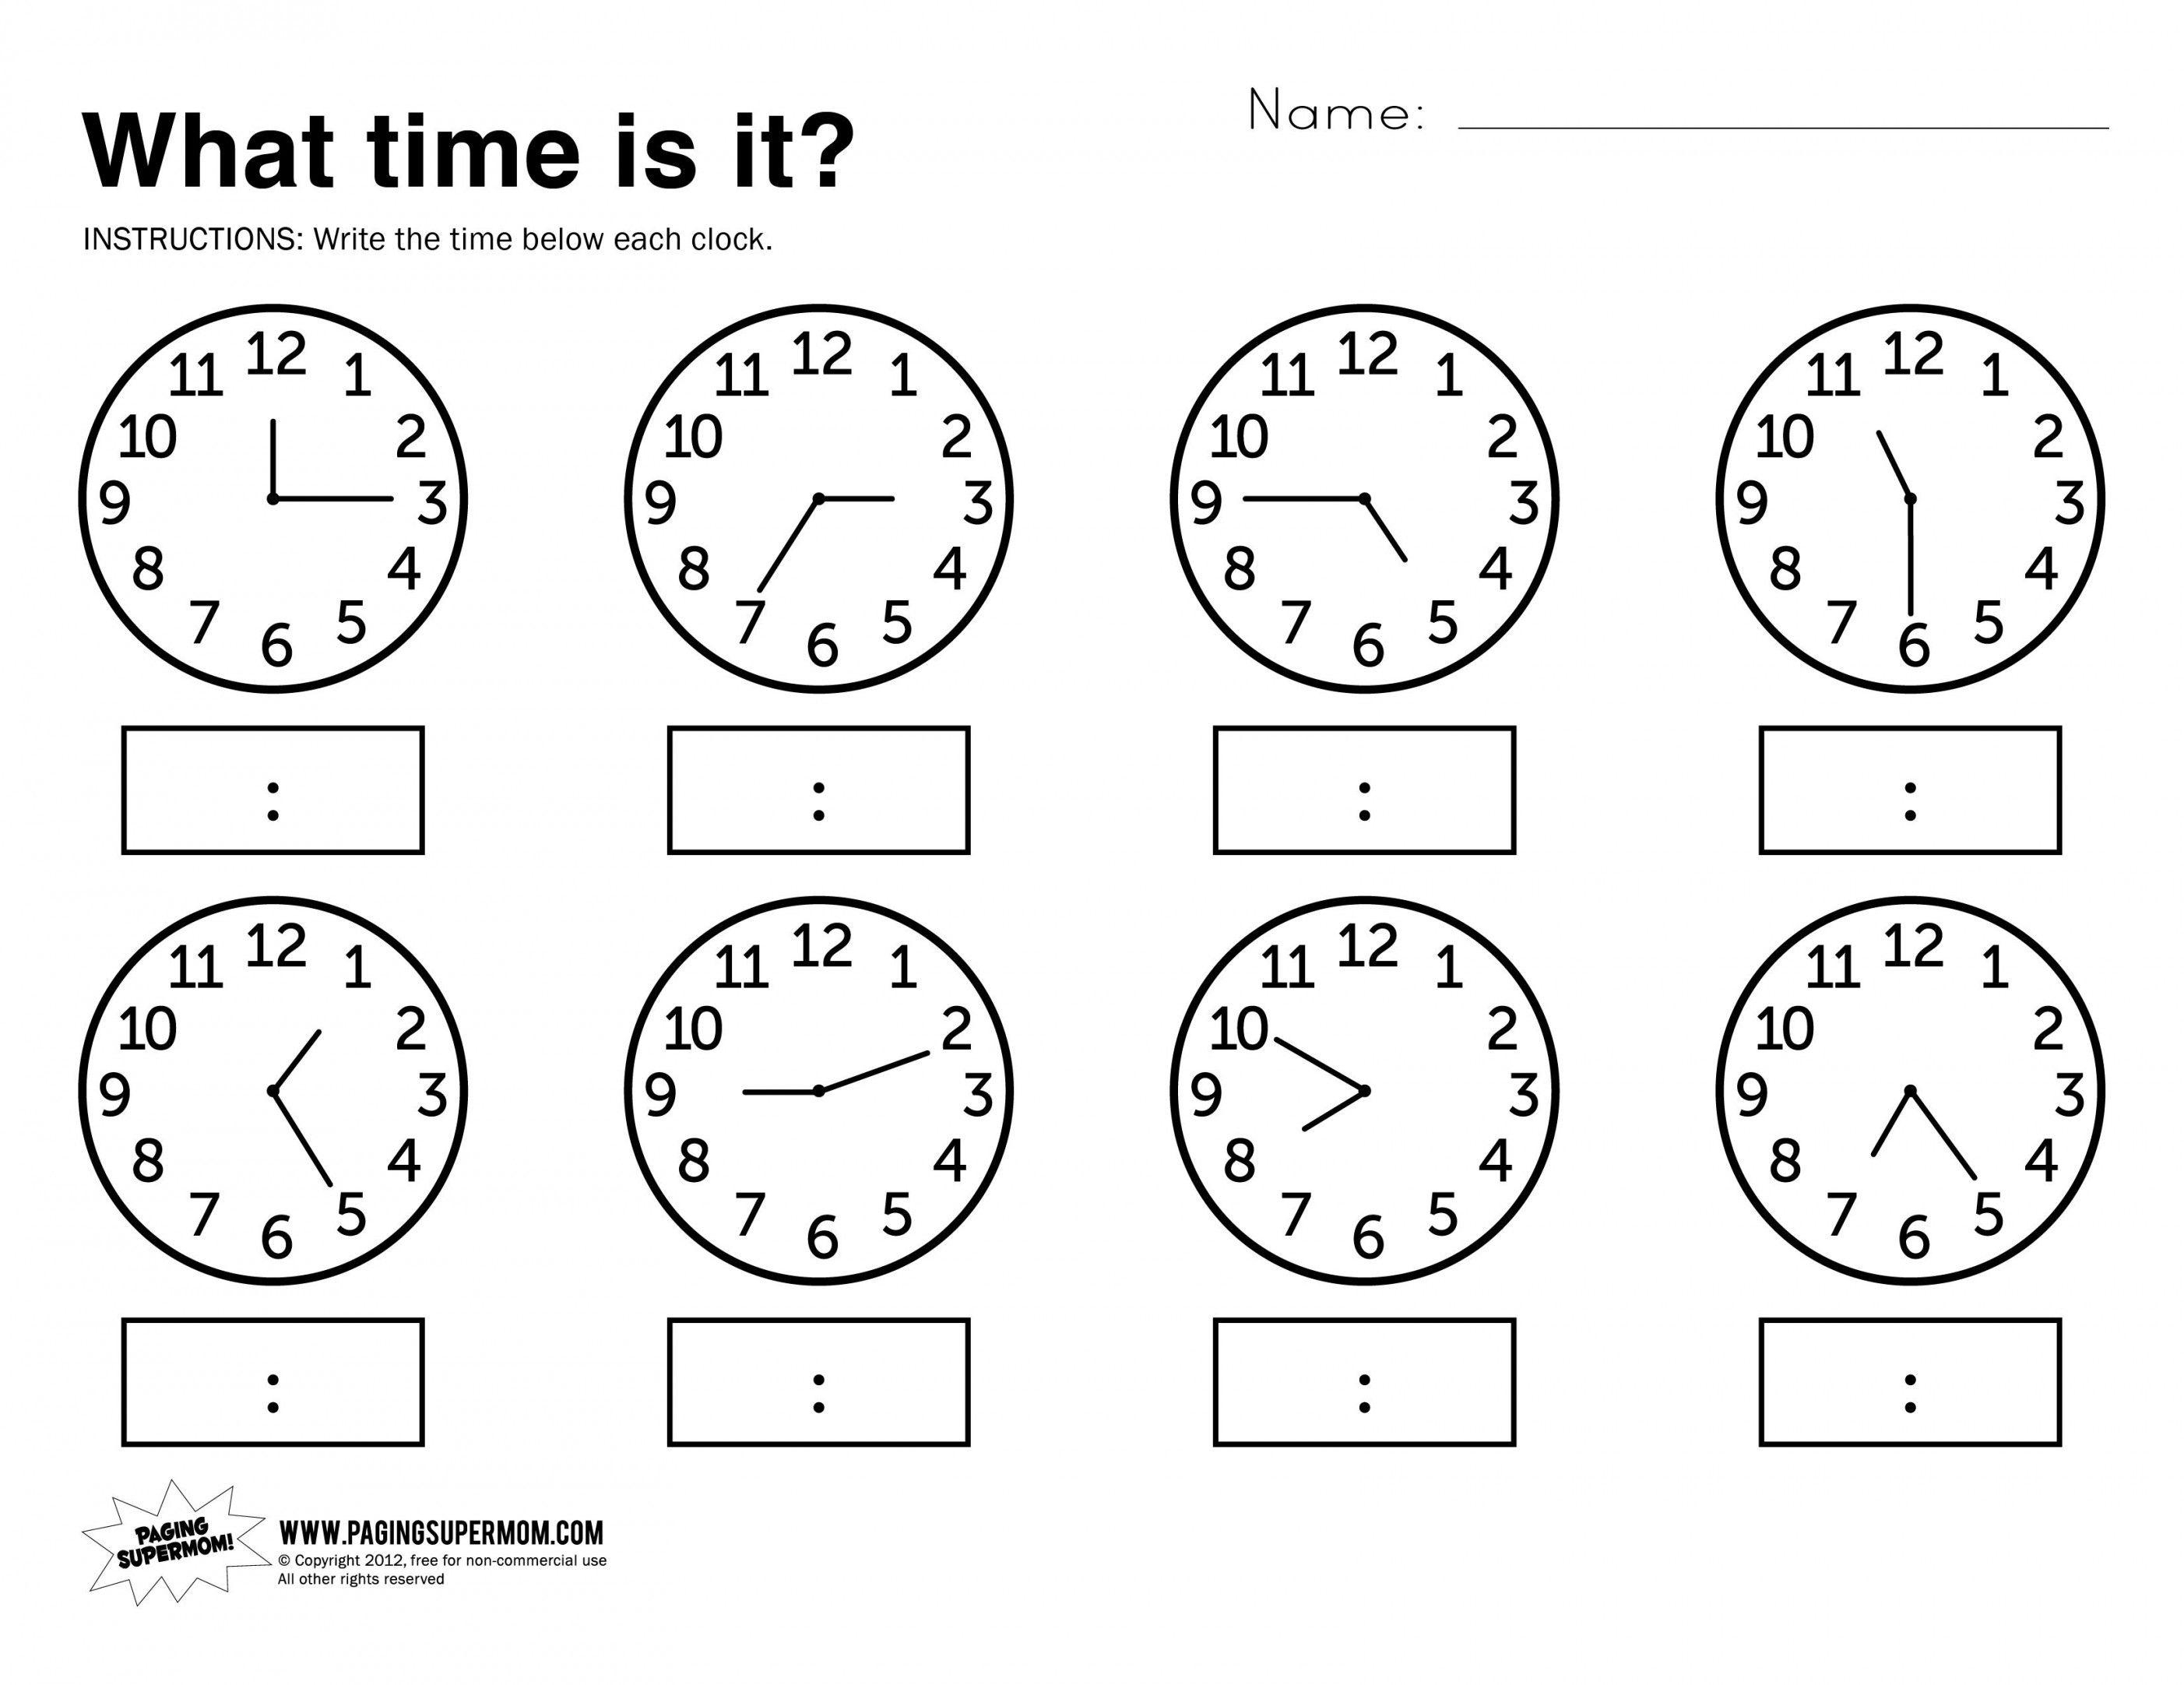 Telling Time Worksheets Grade 3 | Lostranquillos - Free Printable | Telling Time Worksheets Printable